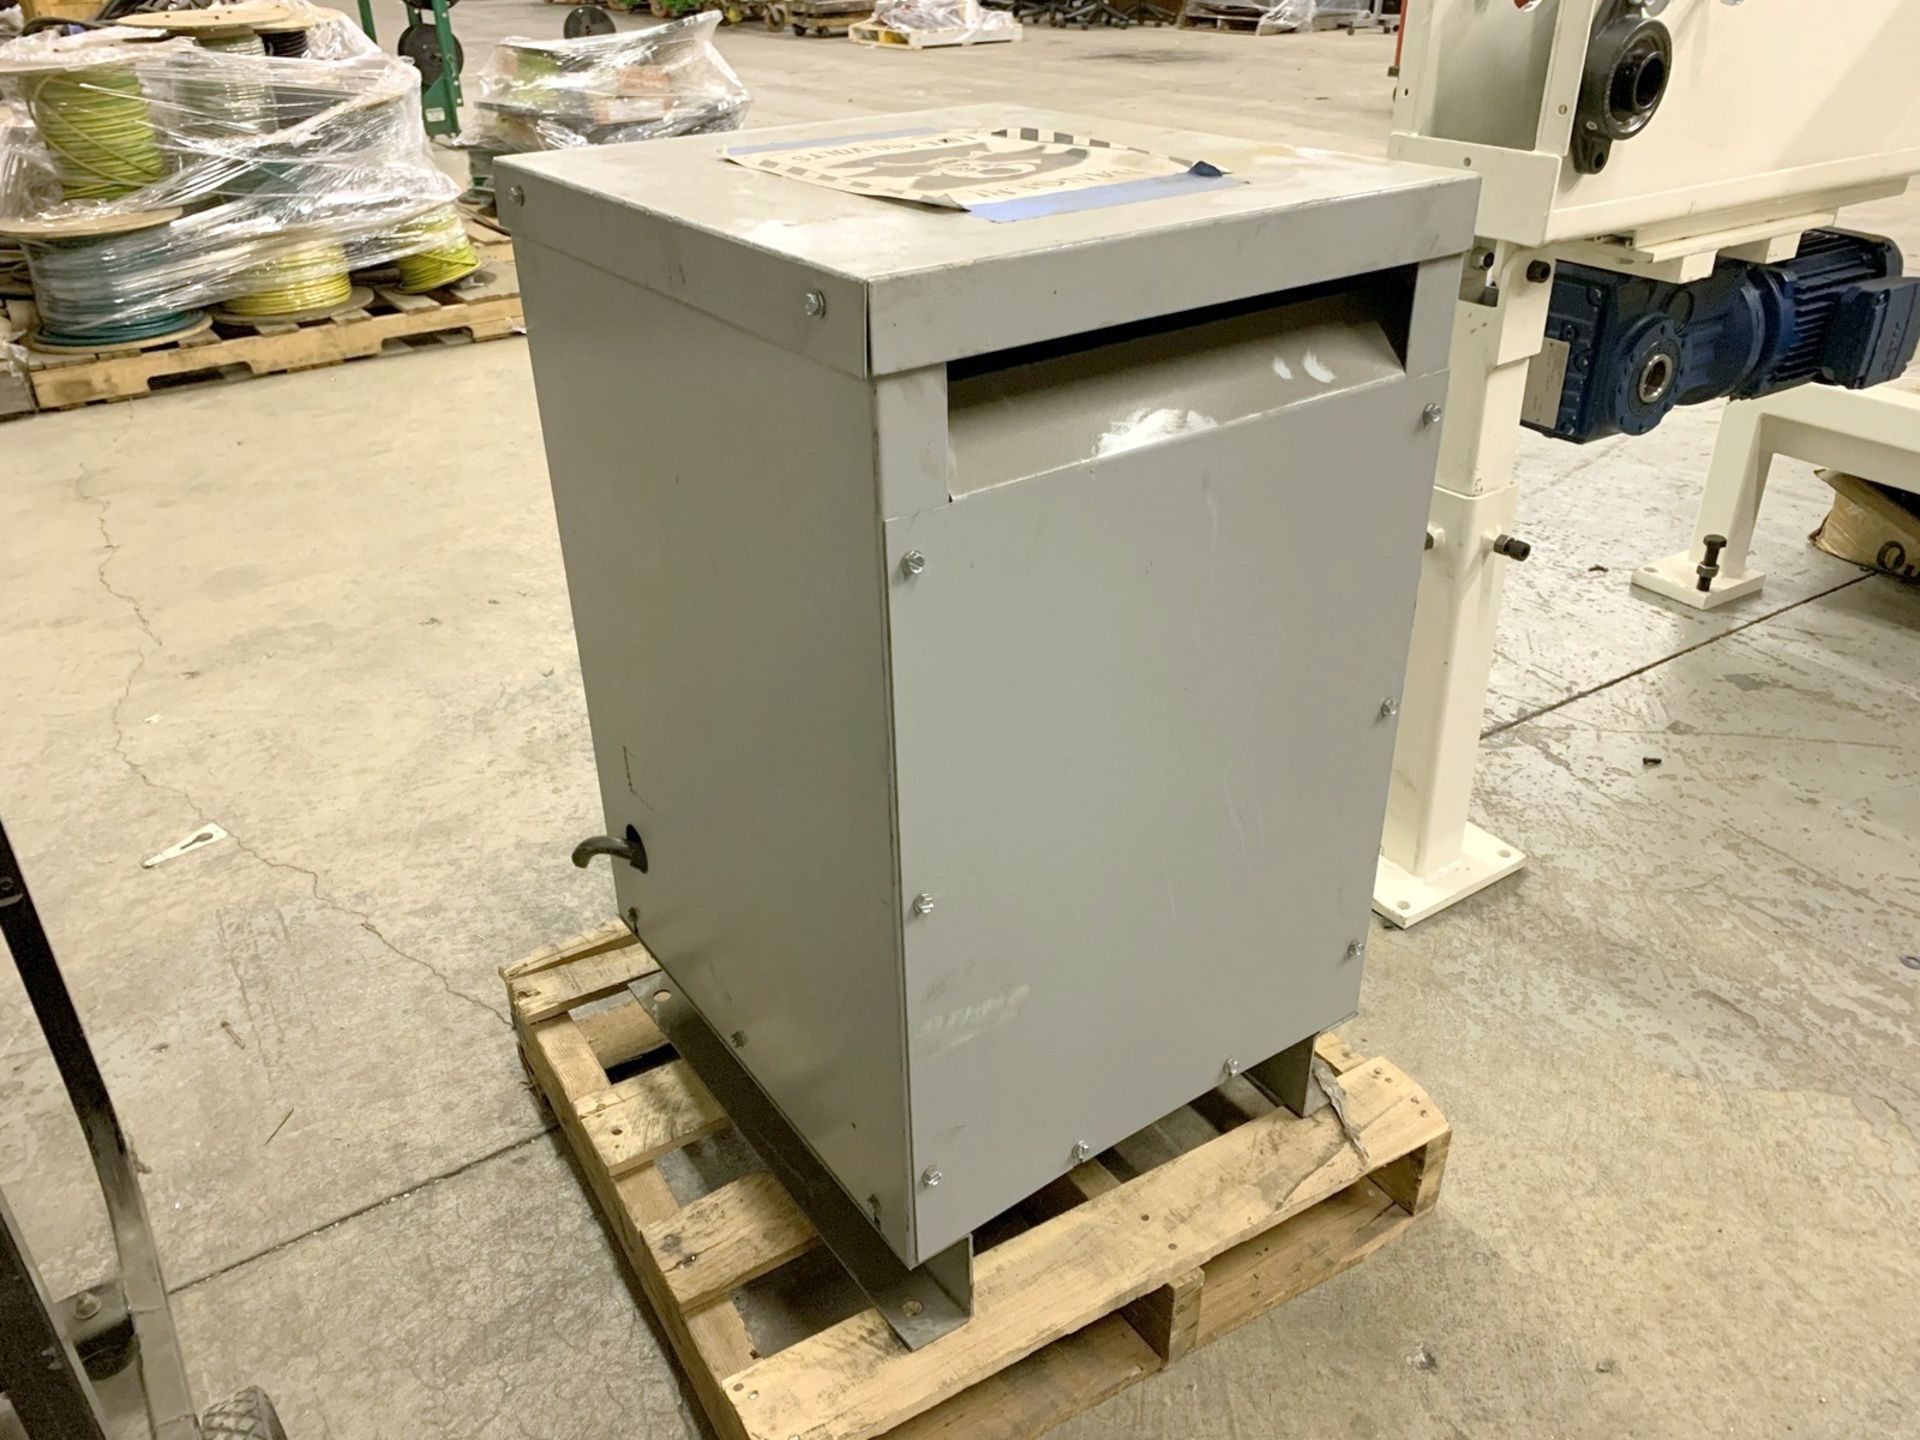 Siemens Cat. No. 3F3Y015 Transformer, 15KVA, 3-Phase (All Items MUST be Removed by Thursday, - Image 3 of 4